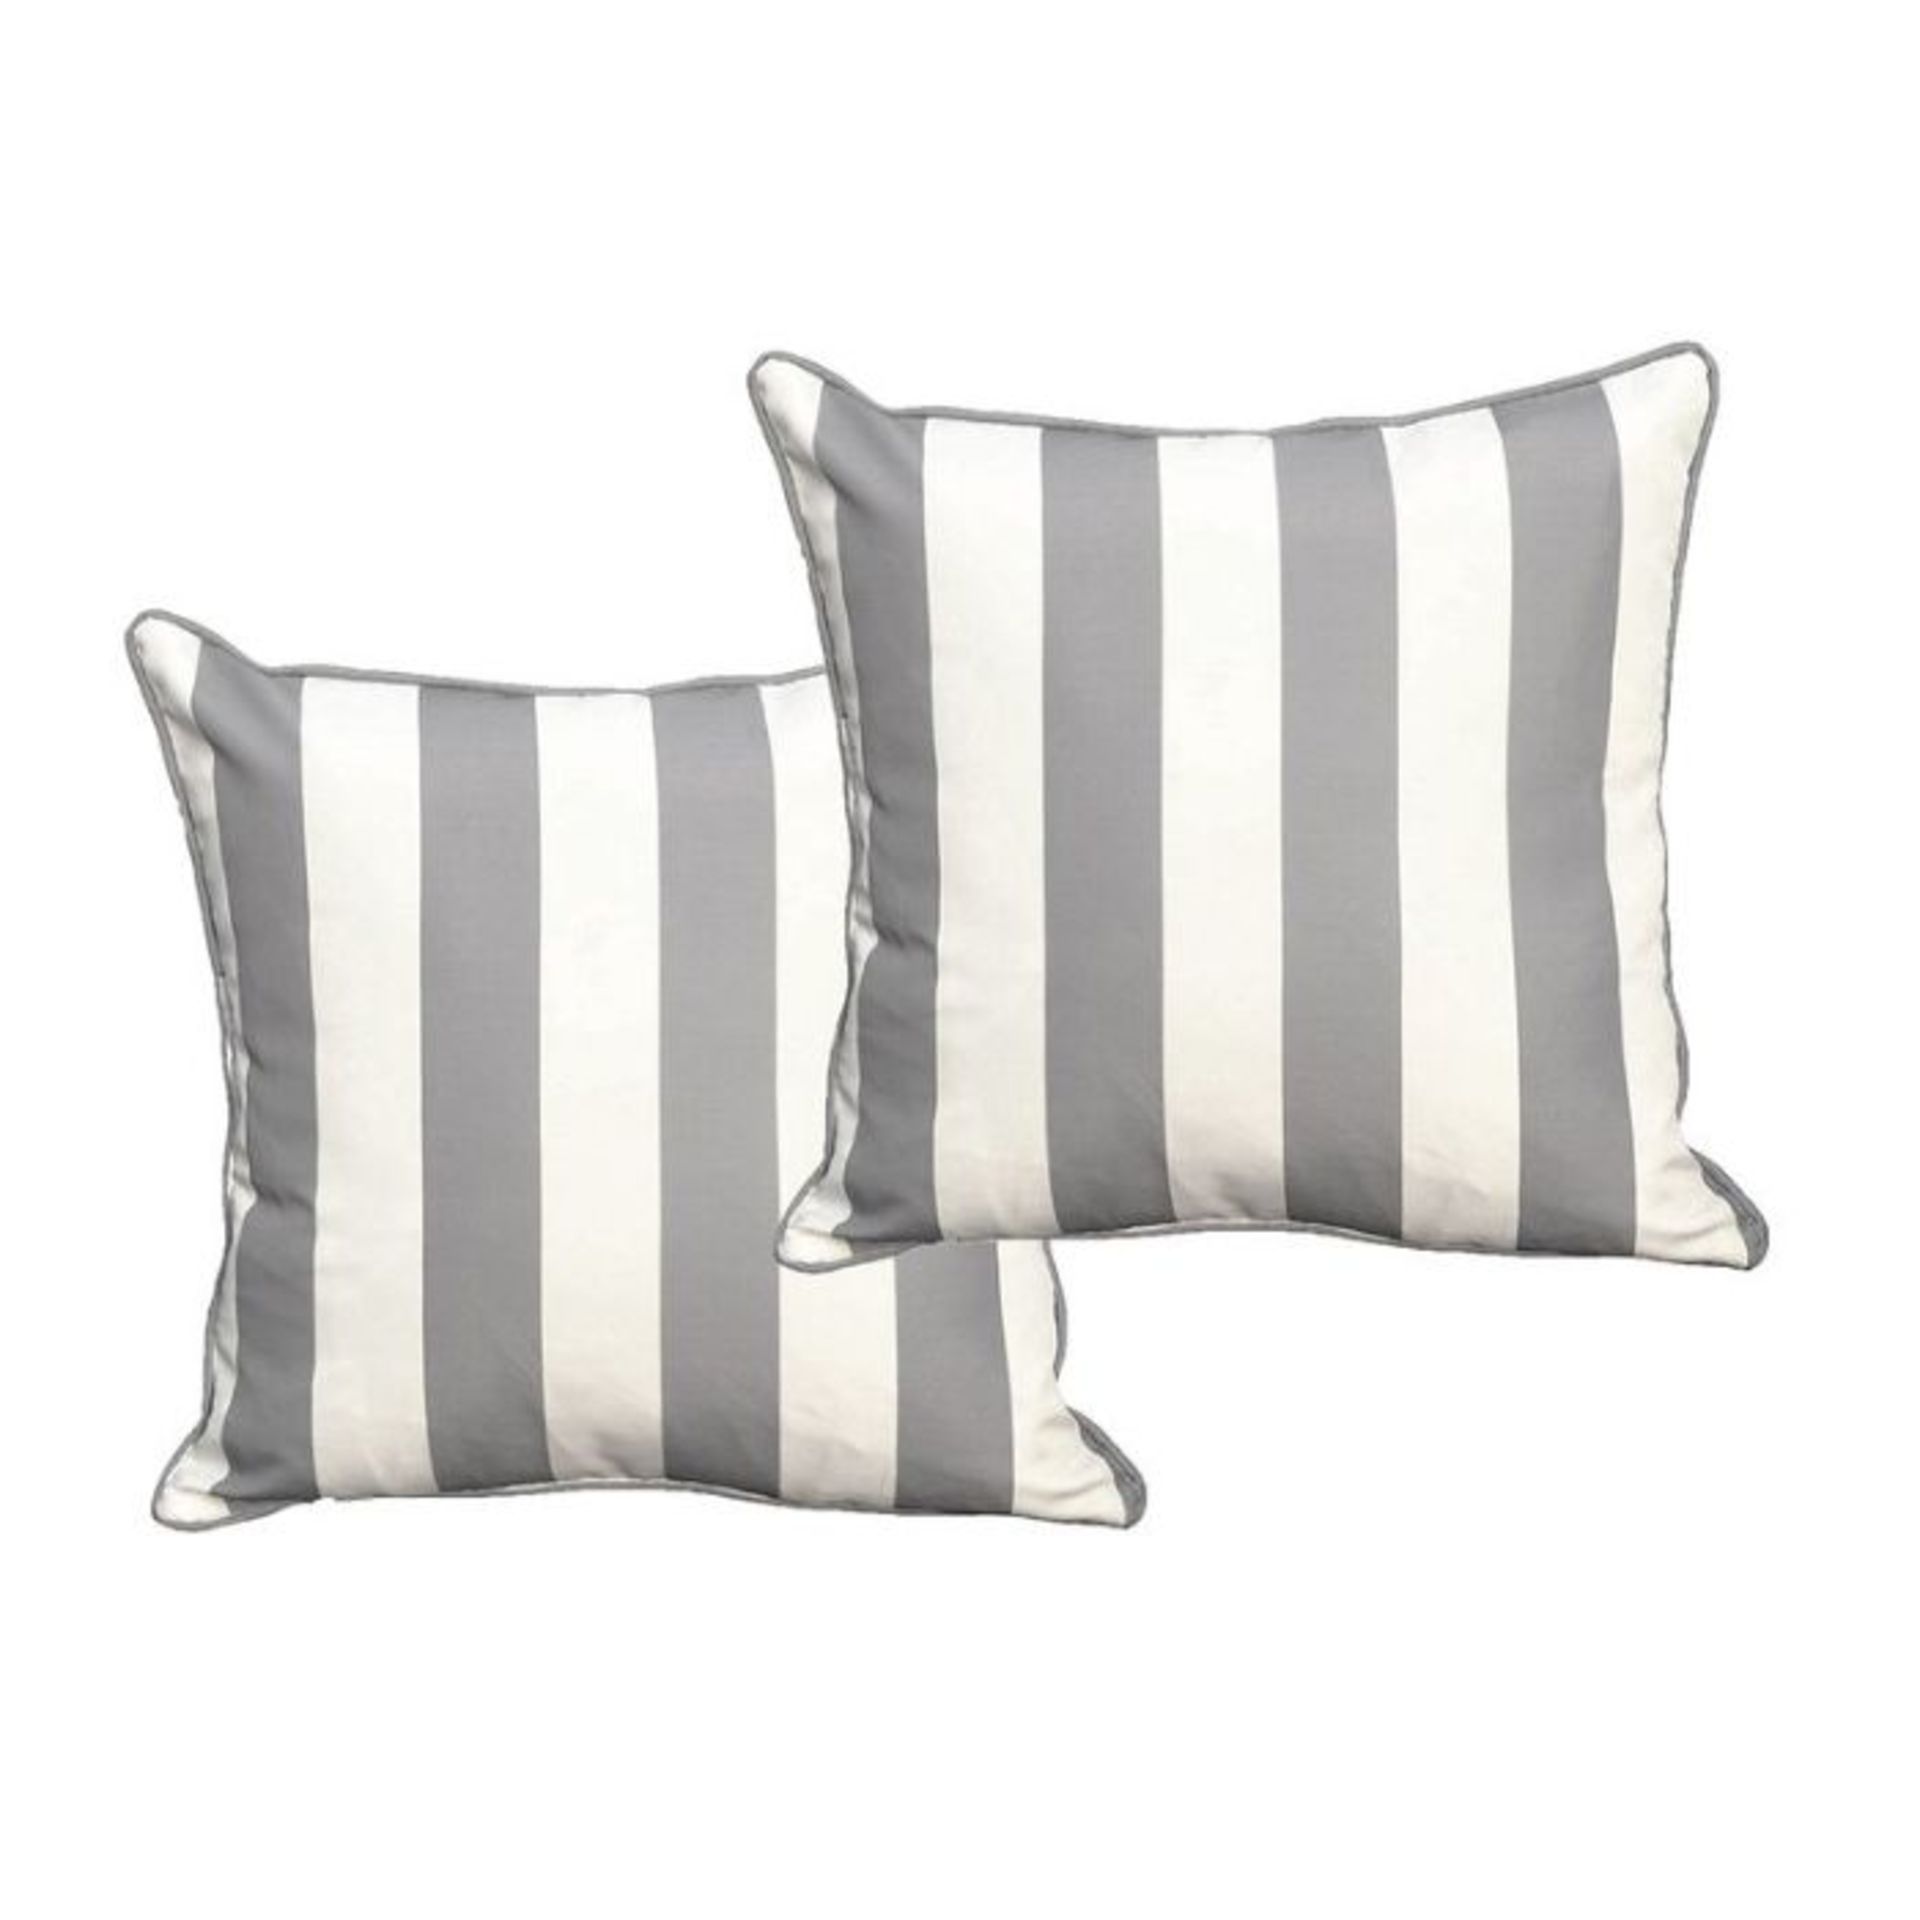 Set of 2, Pontoise Indoor /Outdoor Striped Square Scatter Cushion Cover (GREY & CREAM)